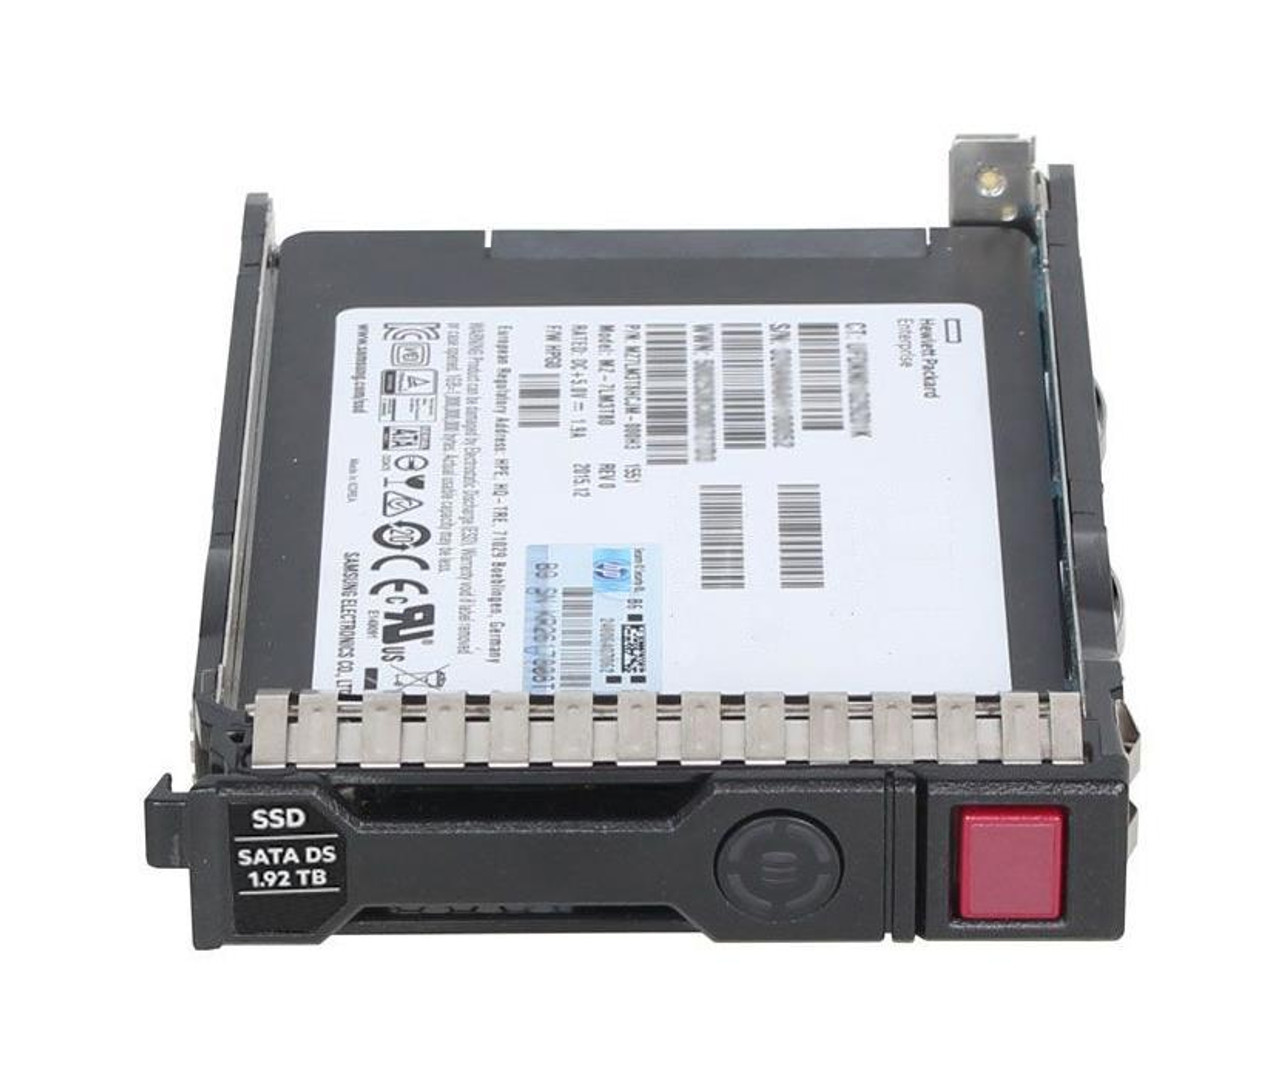 P05938-K21#0D1 HPE 1.92TB SATA 6Gbps Read Intensive 2.5-inch Internal Solid State Drive (SSD) with Smart Carrier